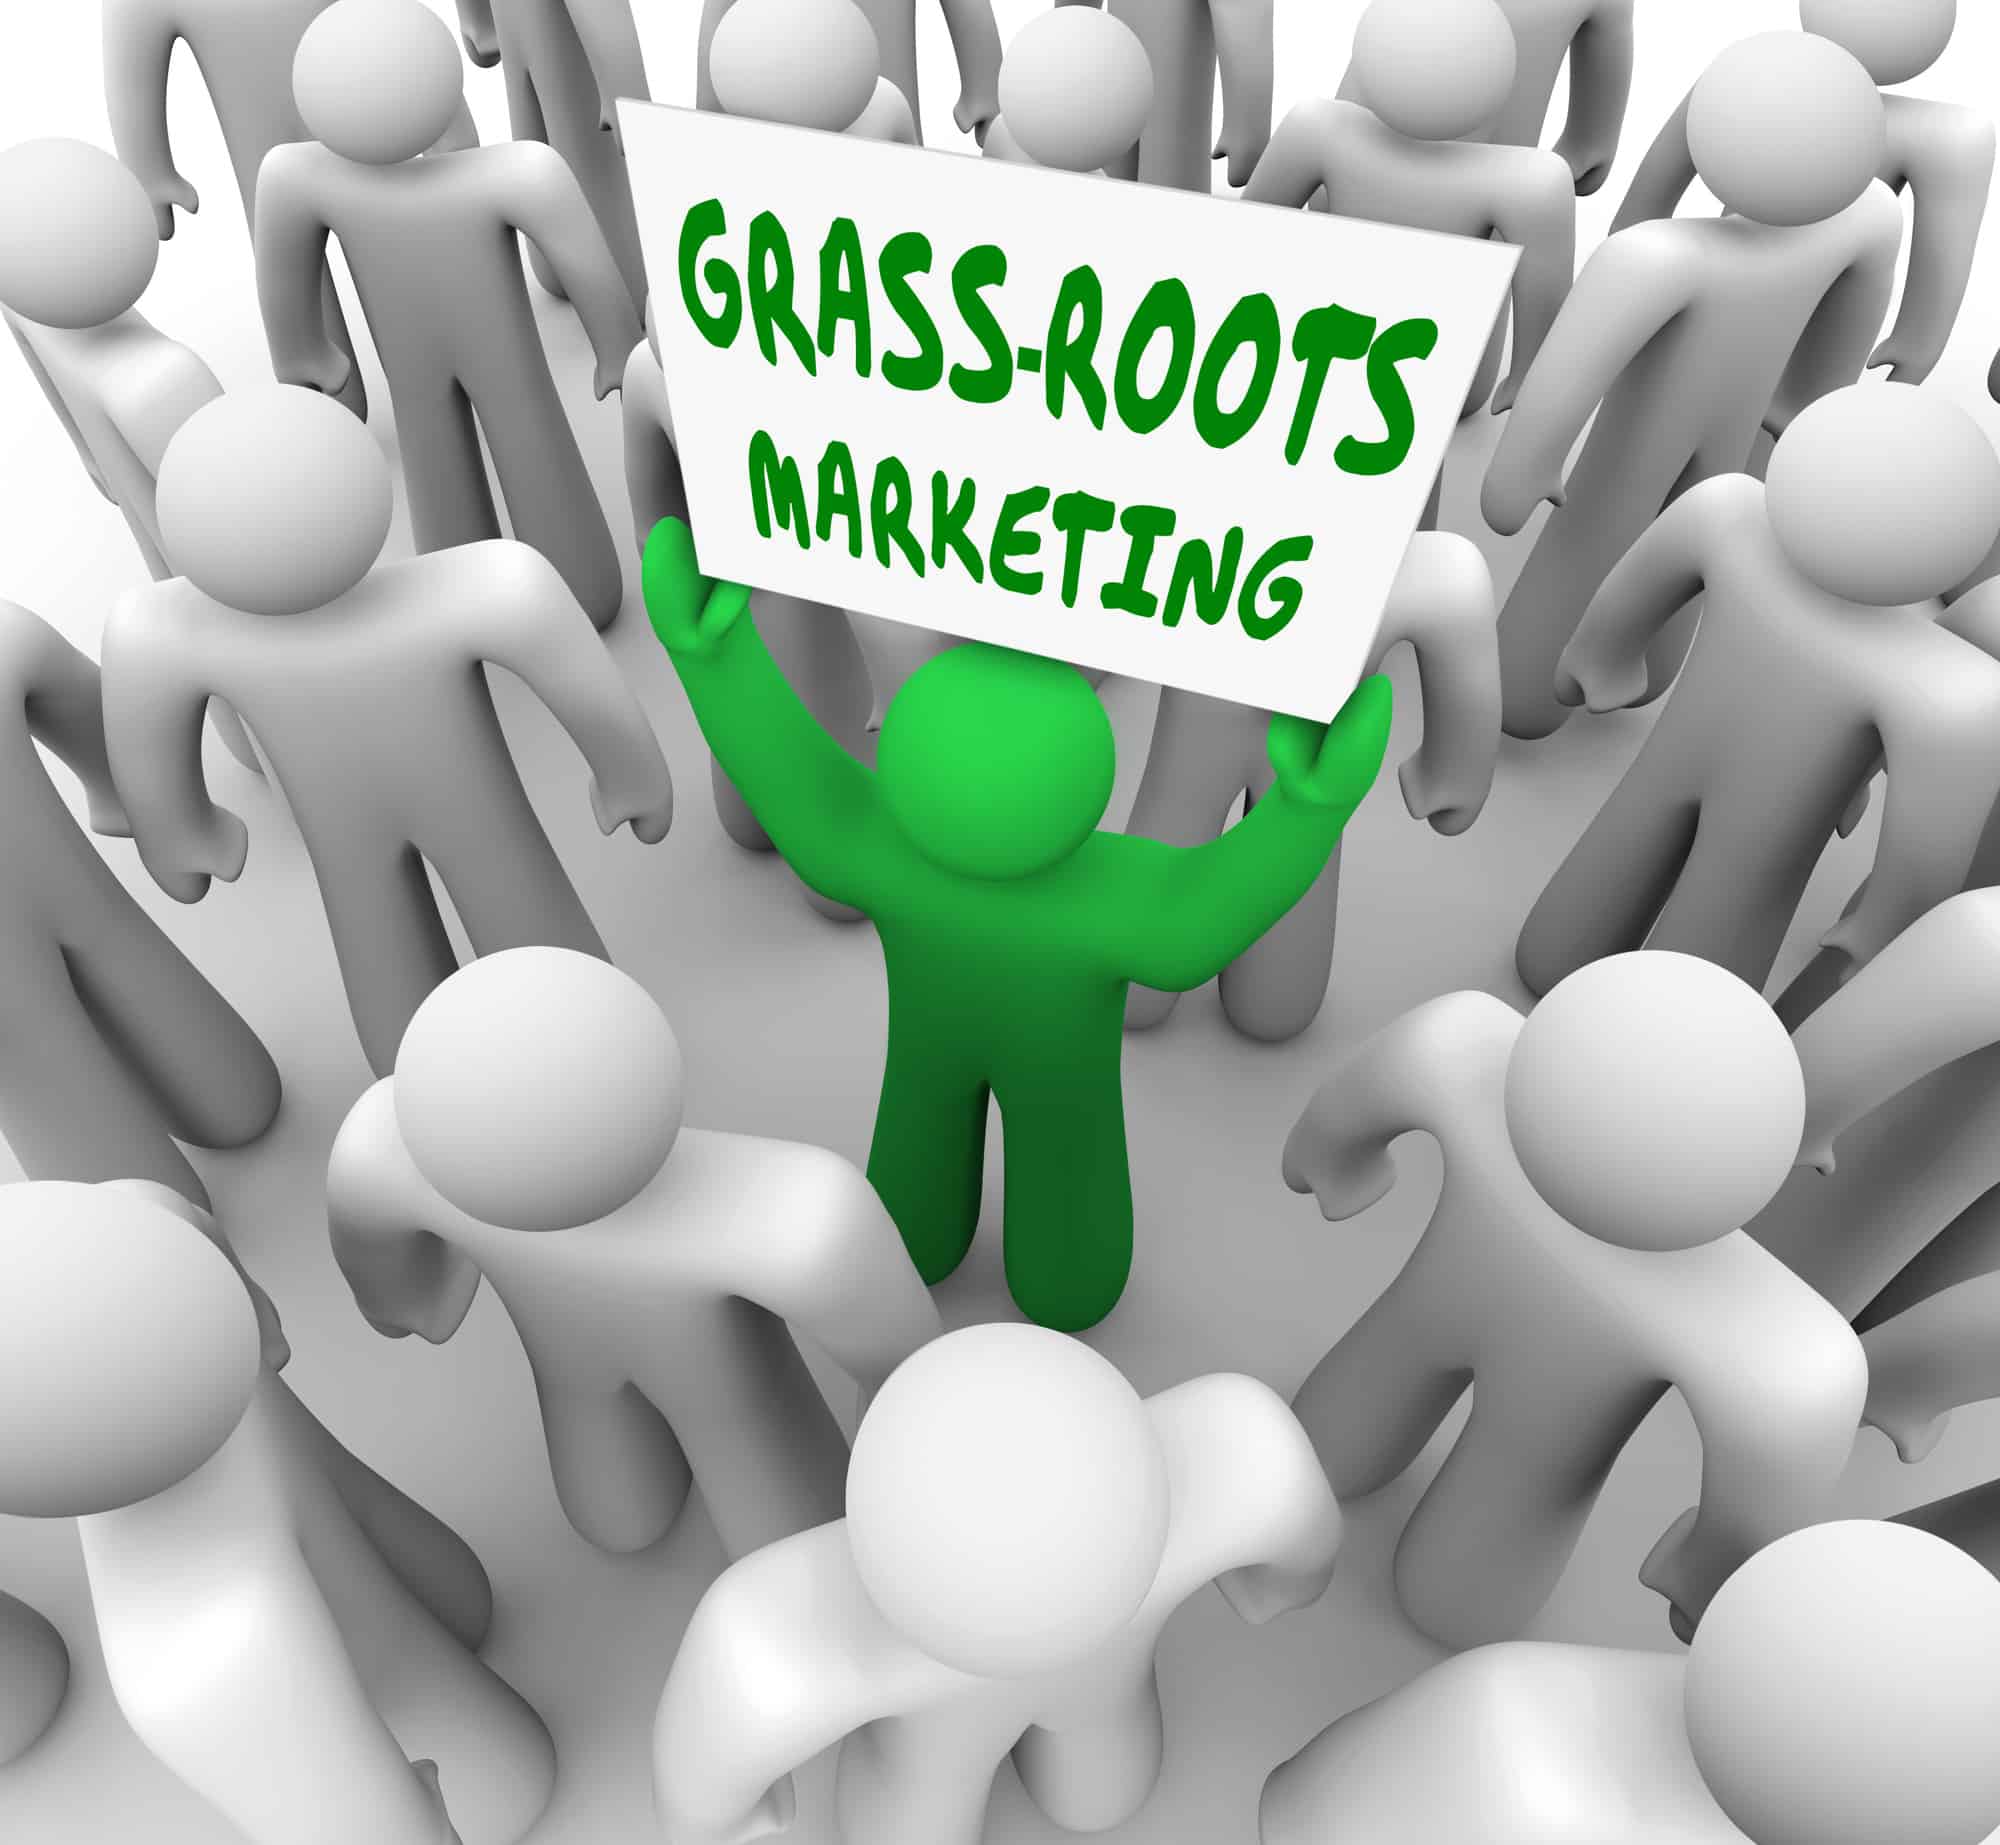 Grassroots Marketing Ideas And Examples For Small Businesses Hexavia Business Club 6886